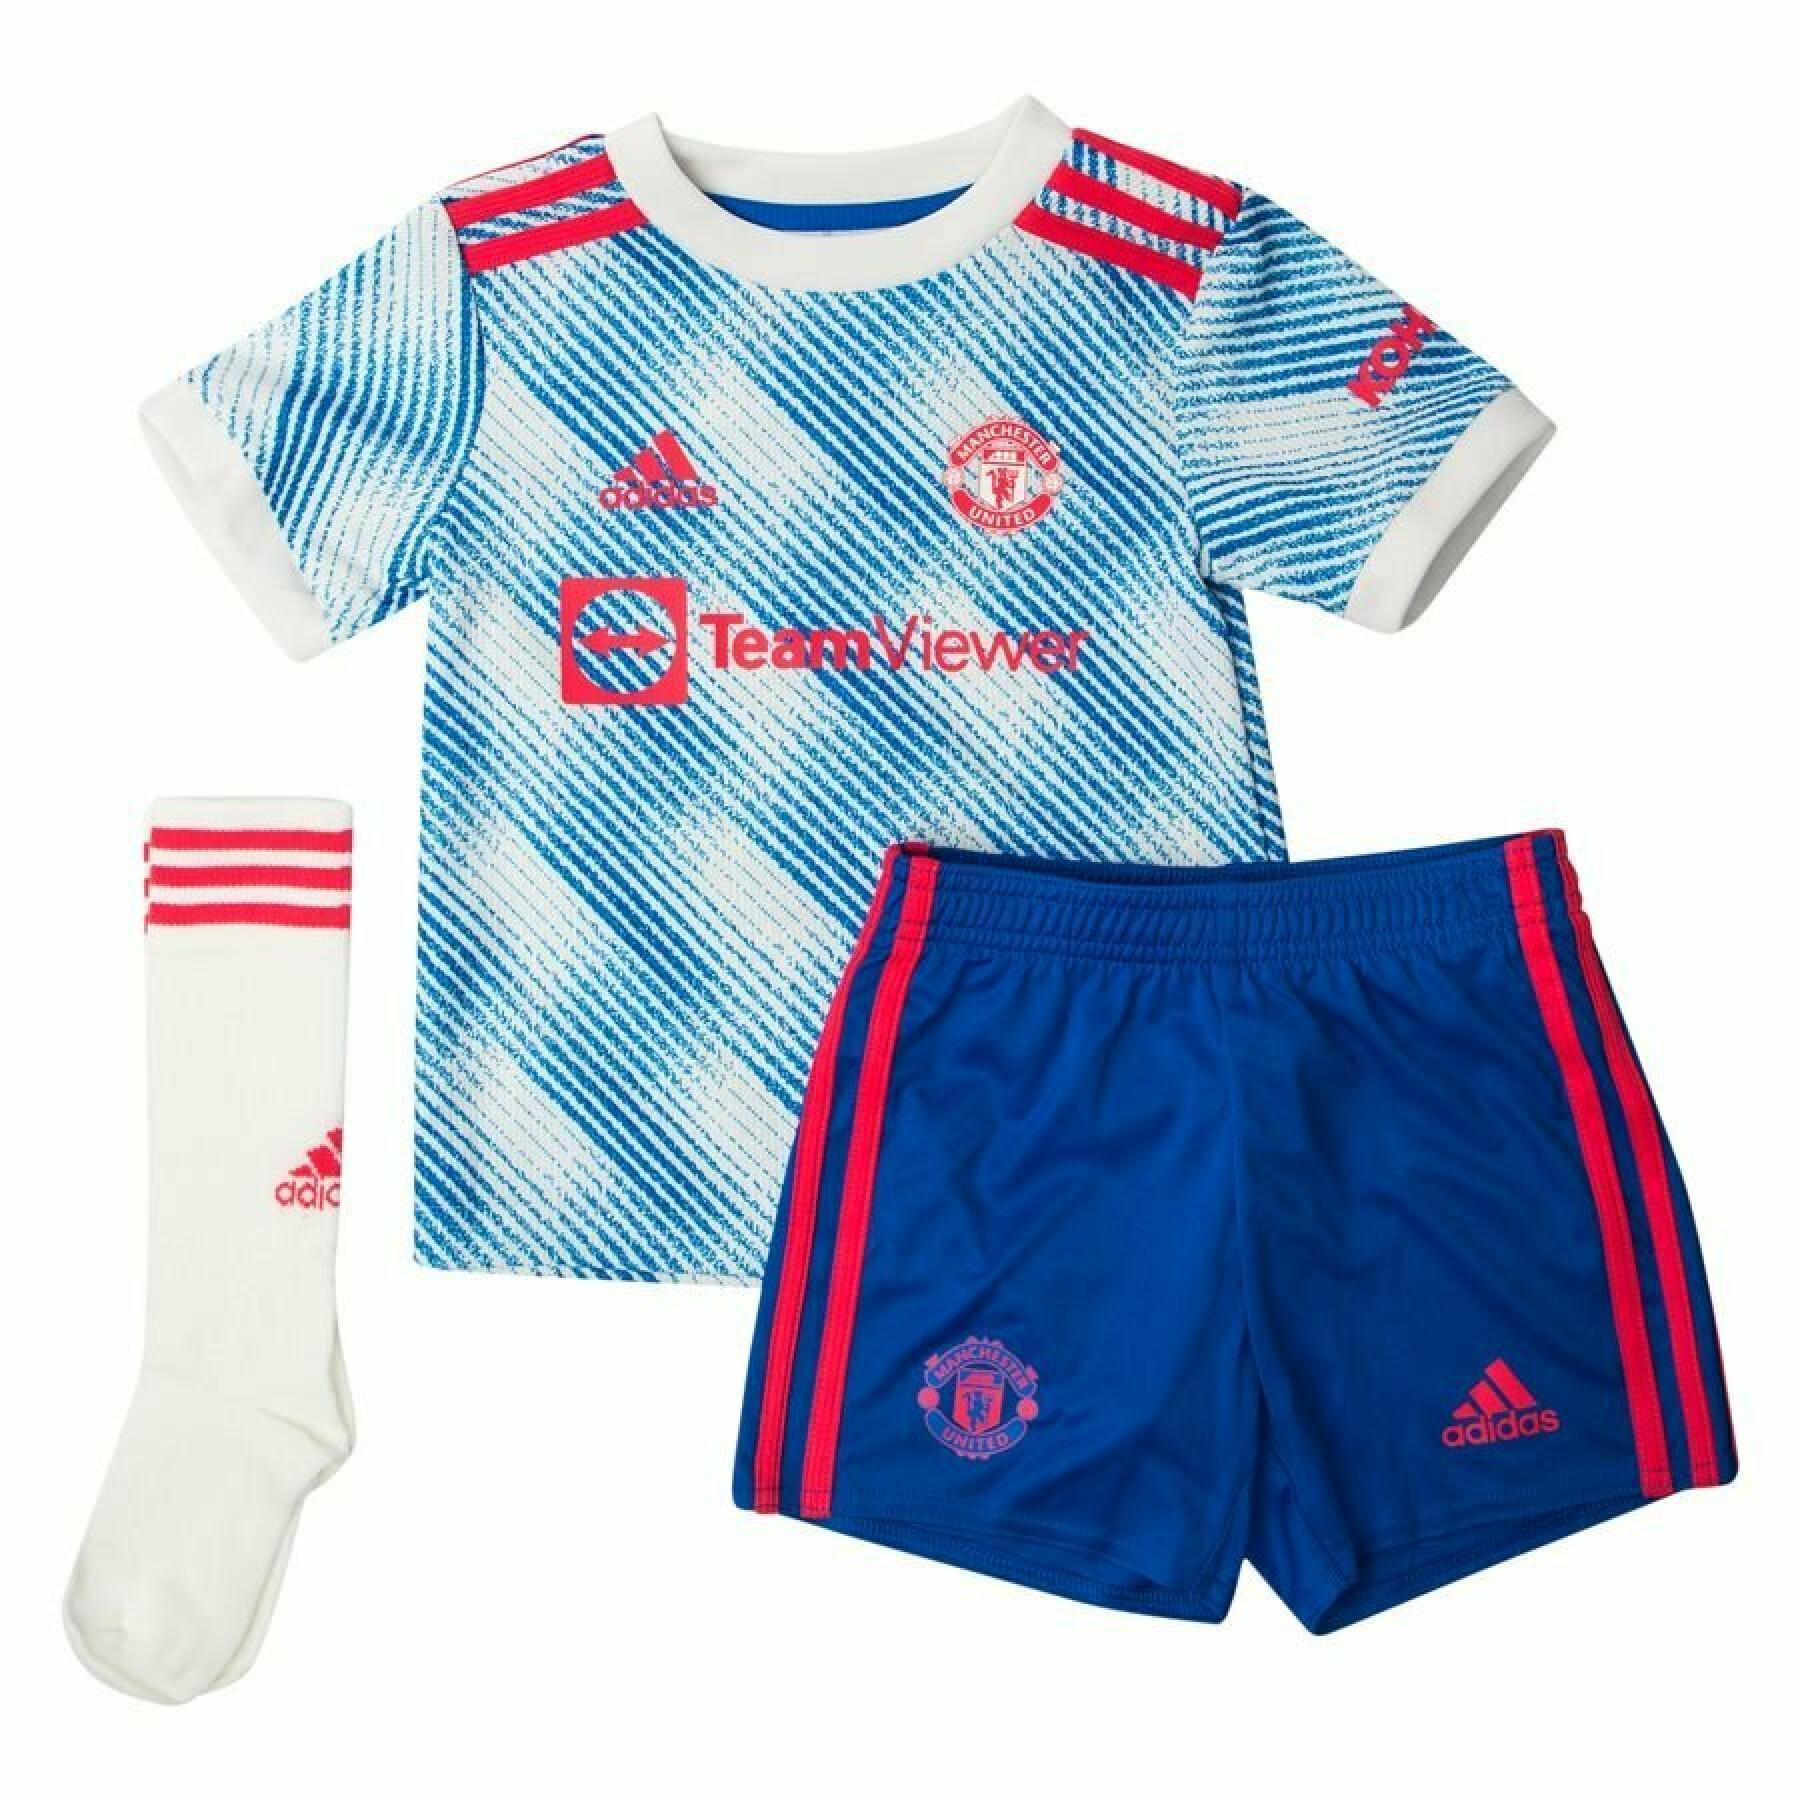 Children's outdoor tracksuit Manchester United 2021/22